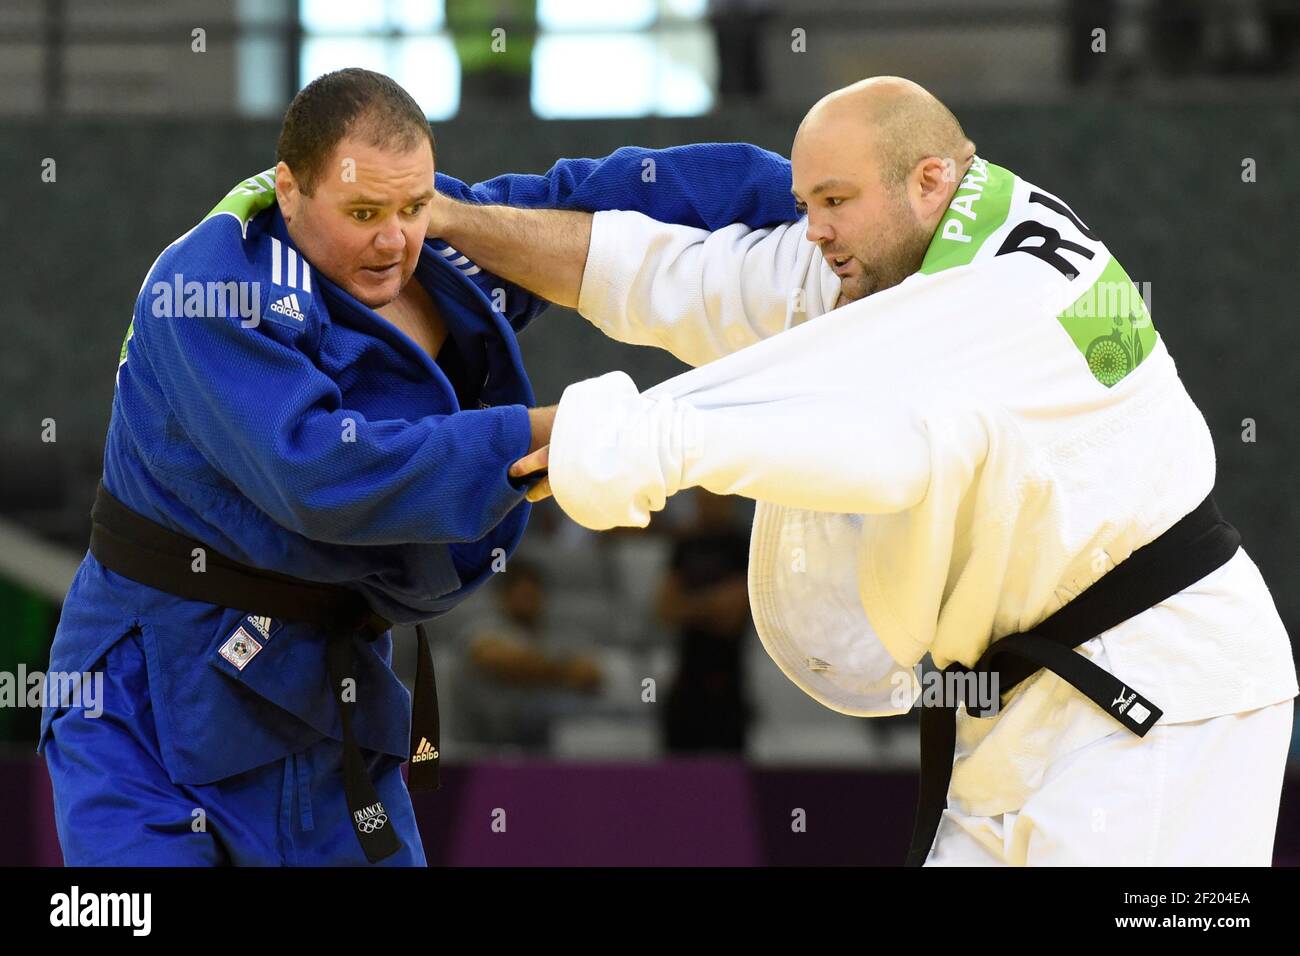 Julien Taurines of France (blue) competes in Judo Blind Men's +90kg against Aleksandr Parasiuk of Russia (white) during the 1st European Games 2015 in Baku, Azerbaijan, Day 14, on June 26, 2015 - Photo Jean-Marie Hervio / KMSP / DPPI Stock Photo